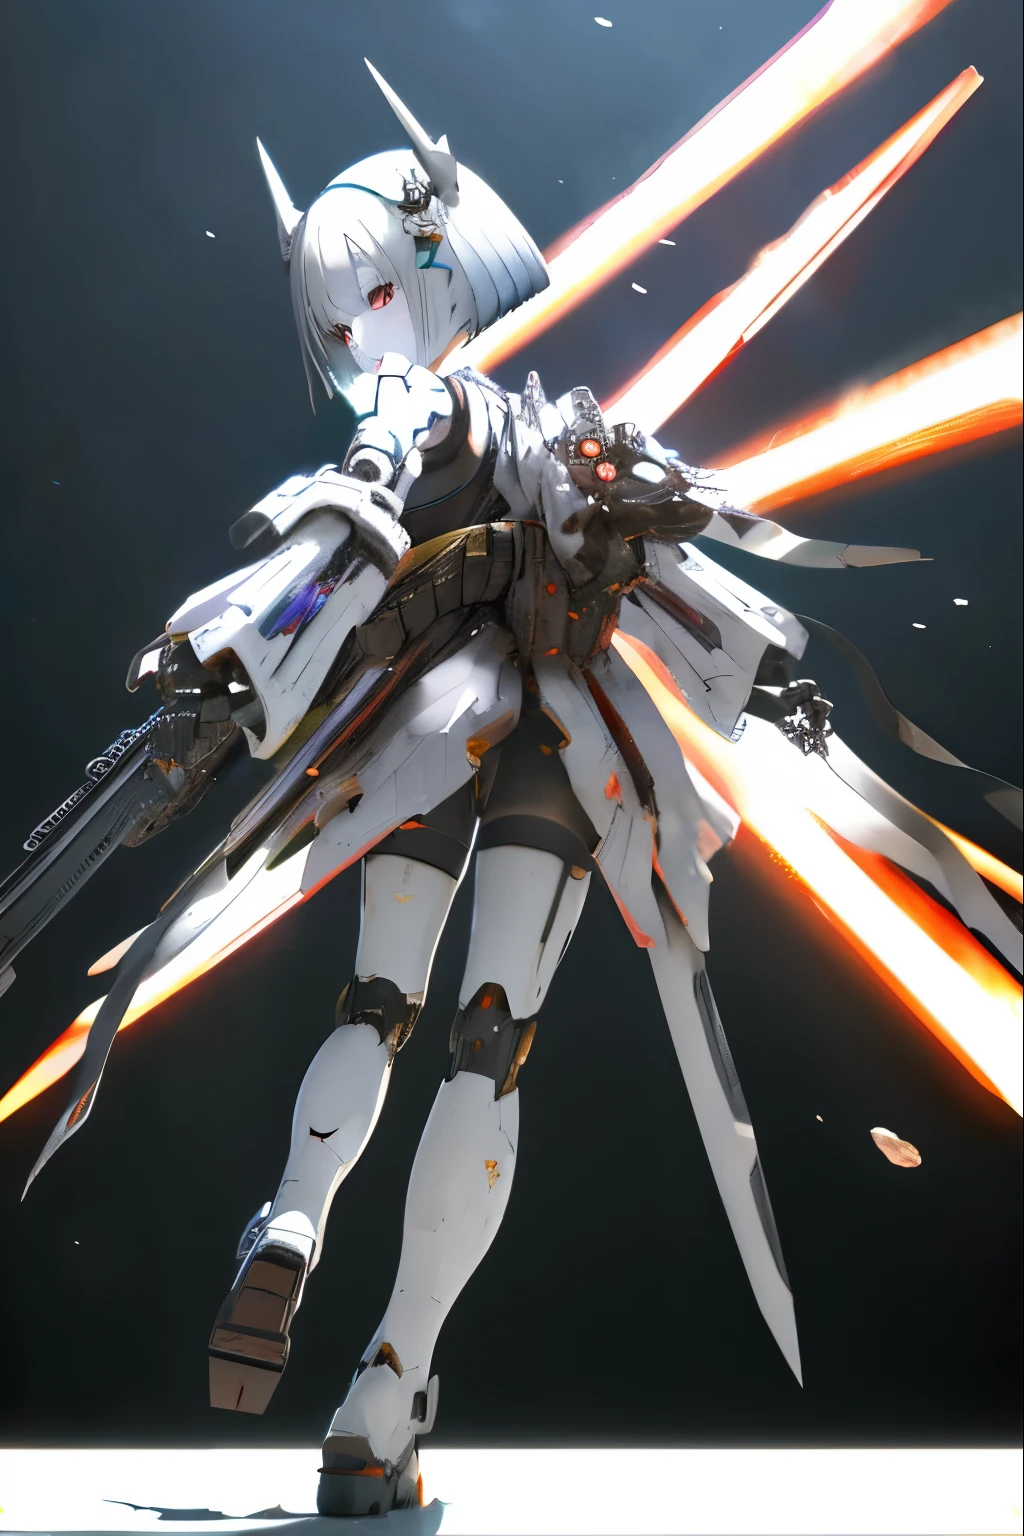 (highest quality)), ((masterpiece)), (very detailed: 1.3), 3d, {(japanese young girl)}, japanese girl wear gothic lolita clothes with white frills under armor, wears a futuristic Gundam mecha,(Gundam), with headgear, with v-fin , armored shoulders,armored under arms, armored under legs, multilayer textureperfect proportions, octane rendering, duotone lighting, Low ISO, wide aperture, White balance, Rule of thirds, ultra HD16k, HDR (High Dynamic Range), Ray Tracing, nvidia RTX, Super Resolution, Subsurface Scattering, PBR Texturing, Post Processing, Anisotropic Filtering, Depth of Field, Maximum Clarity and Clarity, High efficiency subpixel, subpixel convolution, particles of light, light scattered, Tyndall effect, full body:1.5, flying pose, cute, (cute:1.2), (bob cut:1.3),Braid, Black Hair, Thick eyebrows, Light-colored irises, Big, bright black eyes, Long eyelashes, Small, light-colored, natural lips, (Average face of Japanese idols), (The uniquely Japanese childlike face:1.3), (baby face), Wide forehead:1.2, Plump Cheeks, Small jaw, visible side boob, (mechanical wings),in the sky,(shoot from behind:1.5),(shoot from below), looking back,looking at viewer,Focus on the eyes ,Looking up at her from the soles of her feet,open legs,